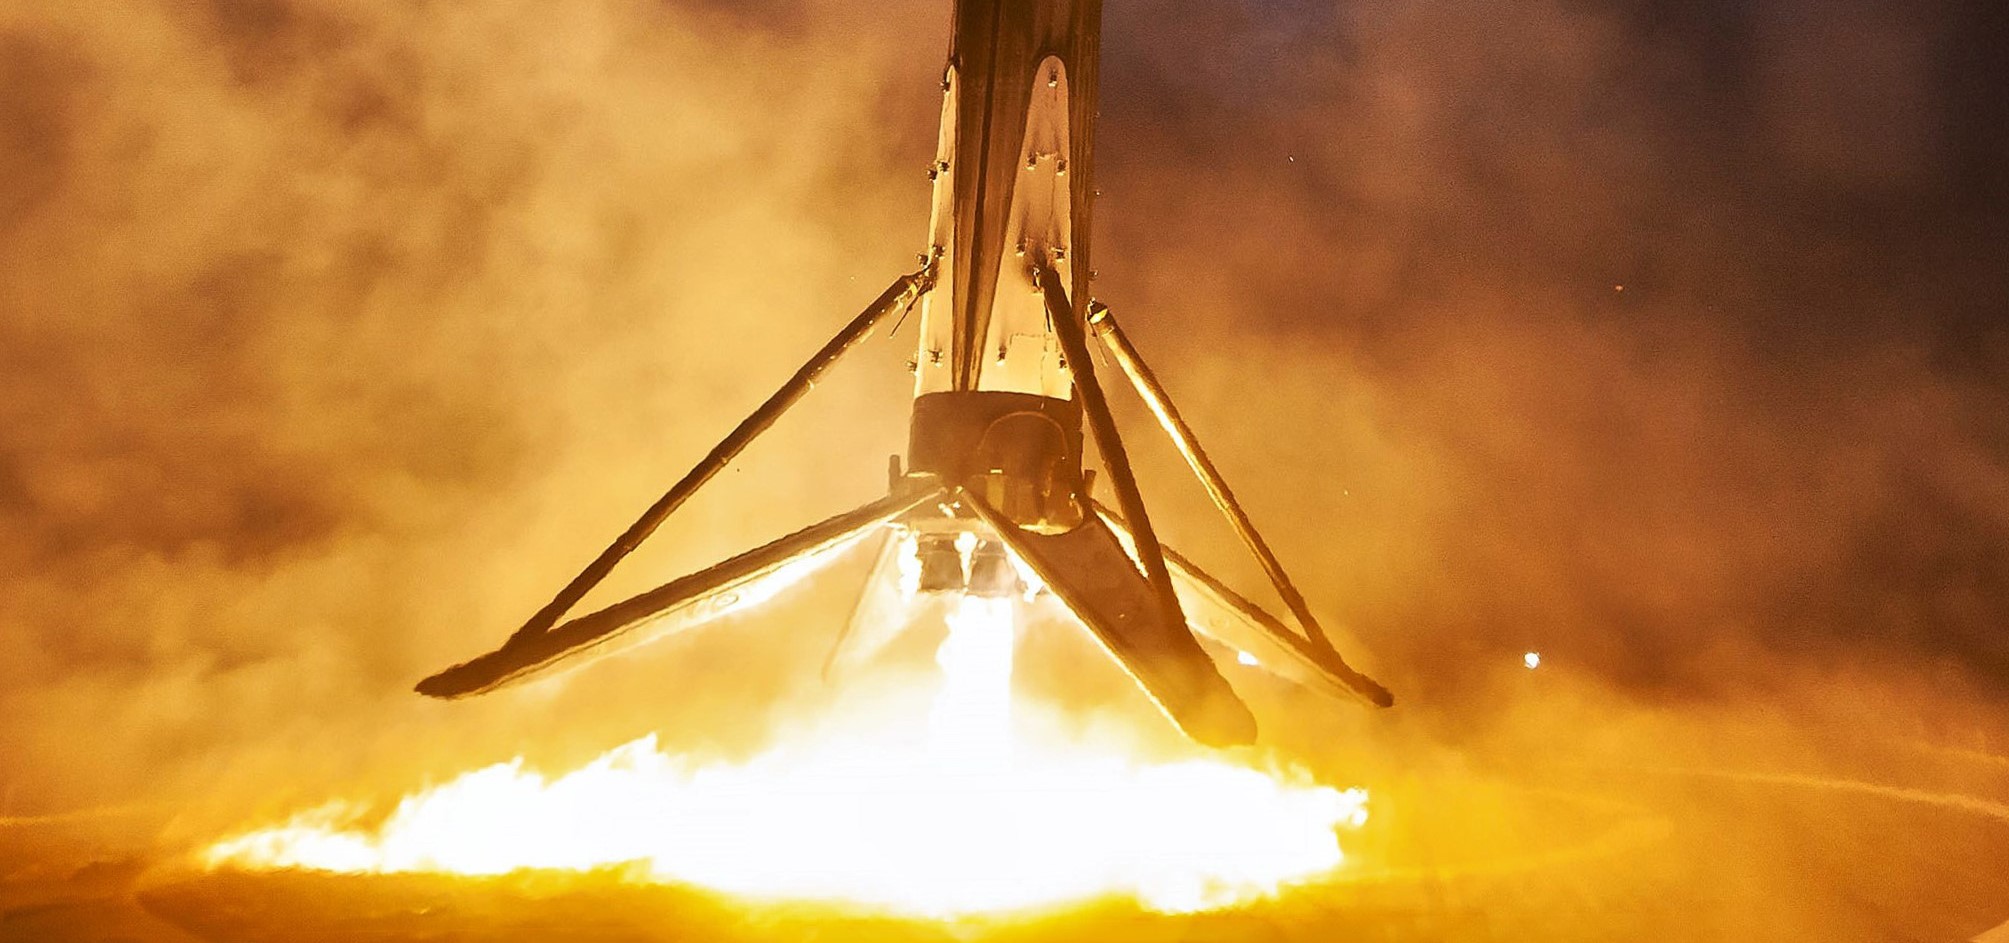 SpaceX Falcon 9 to attempt unusual drone ship landing after space ...